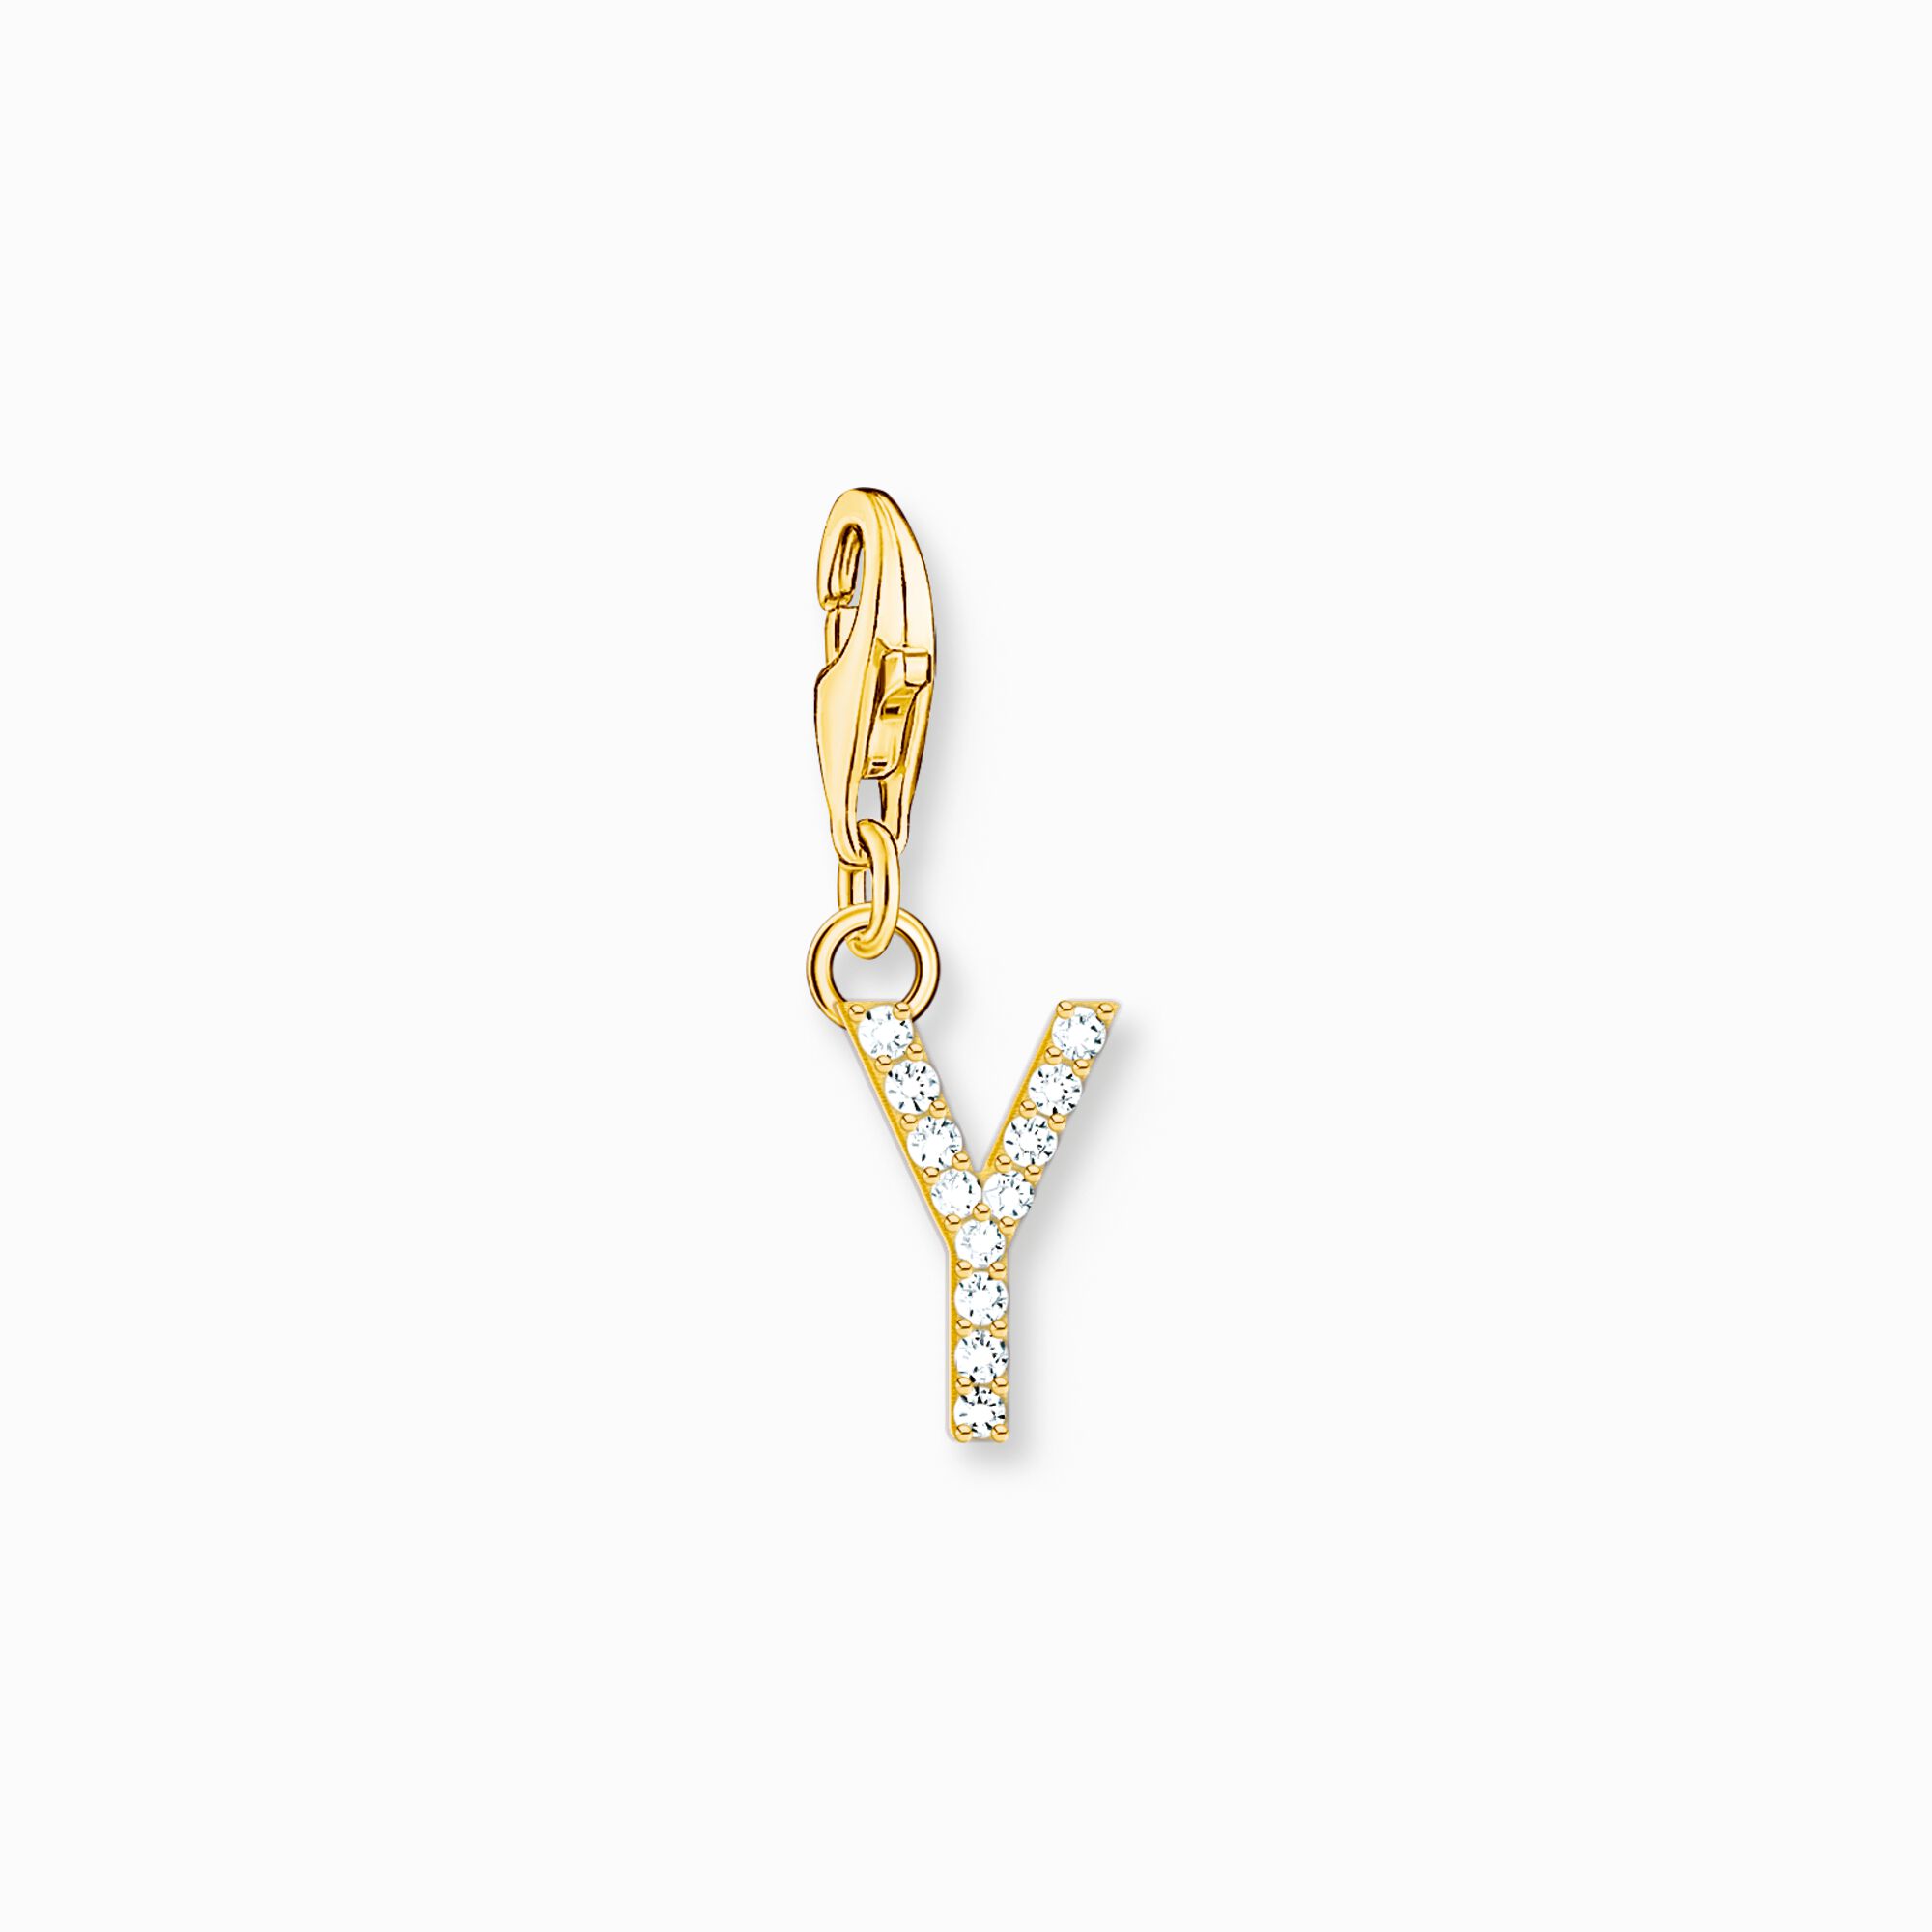 Charm pendant letter Y with white stones gold plated from the Charm Club collection in the THOMAS SABO online store